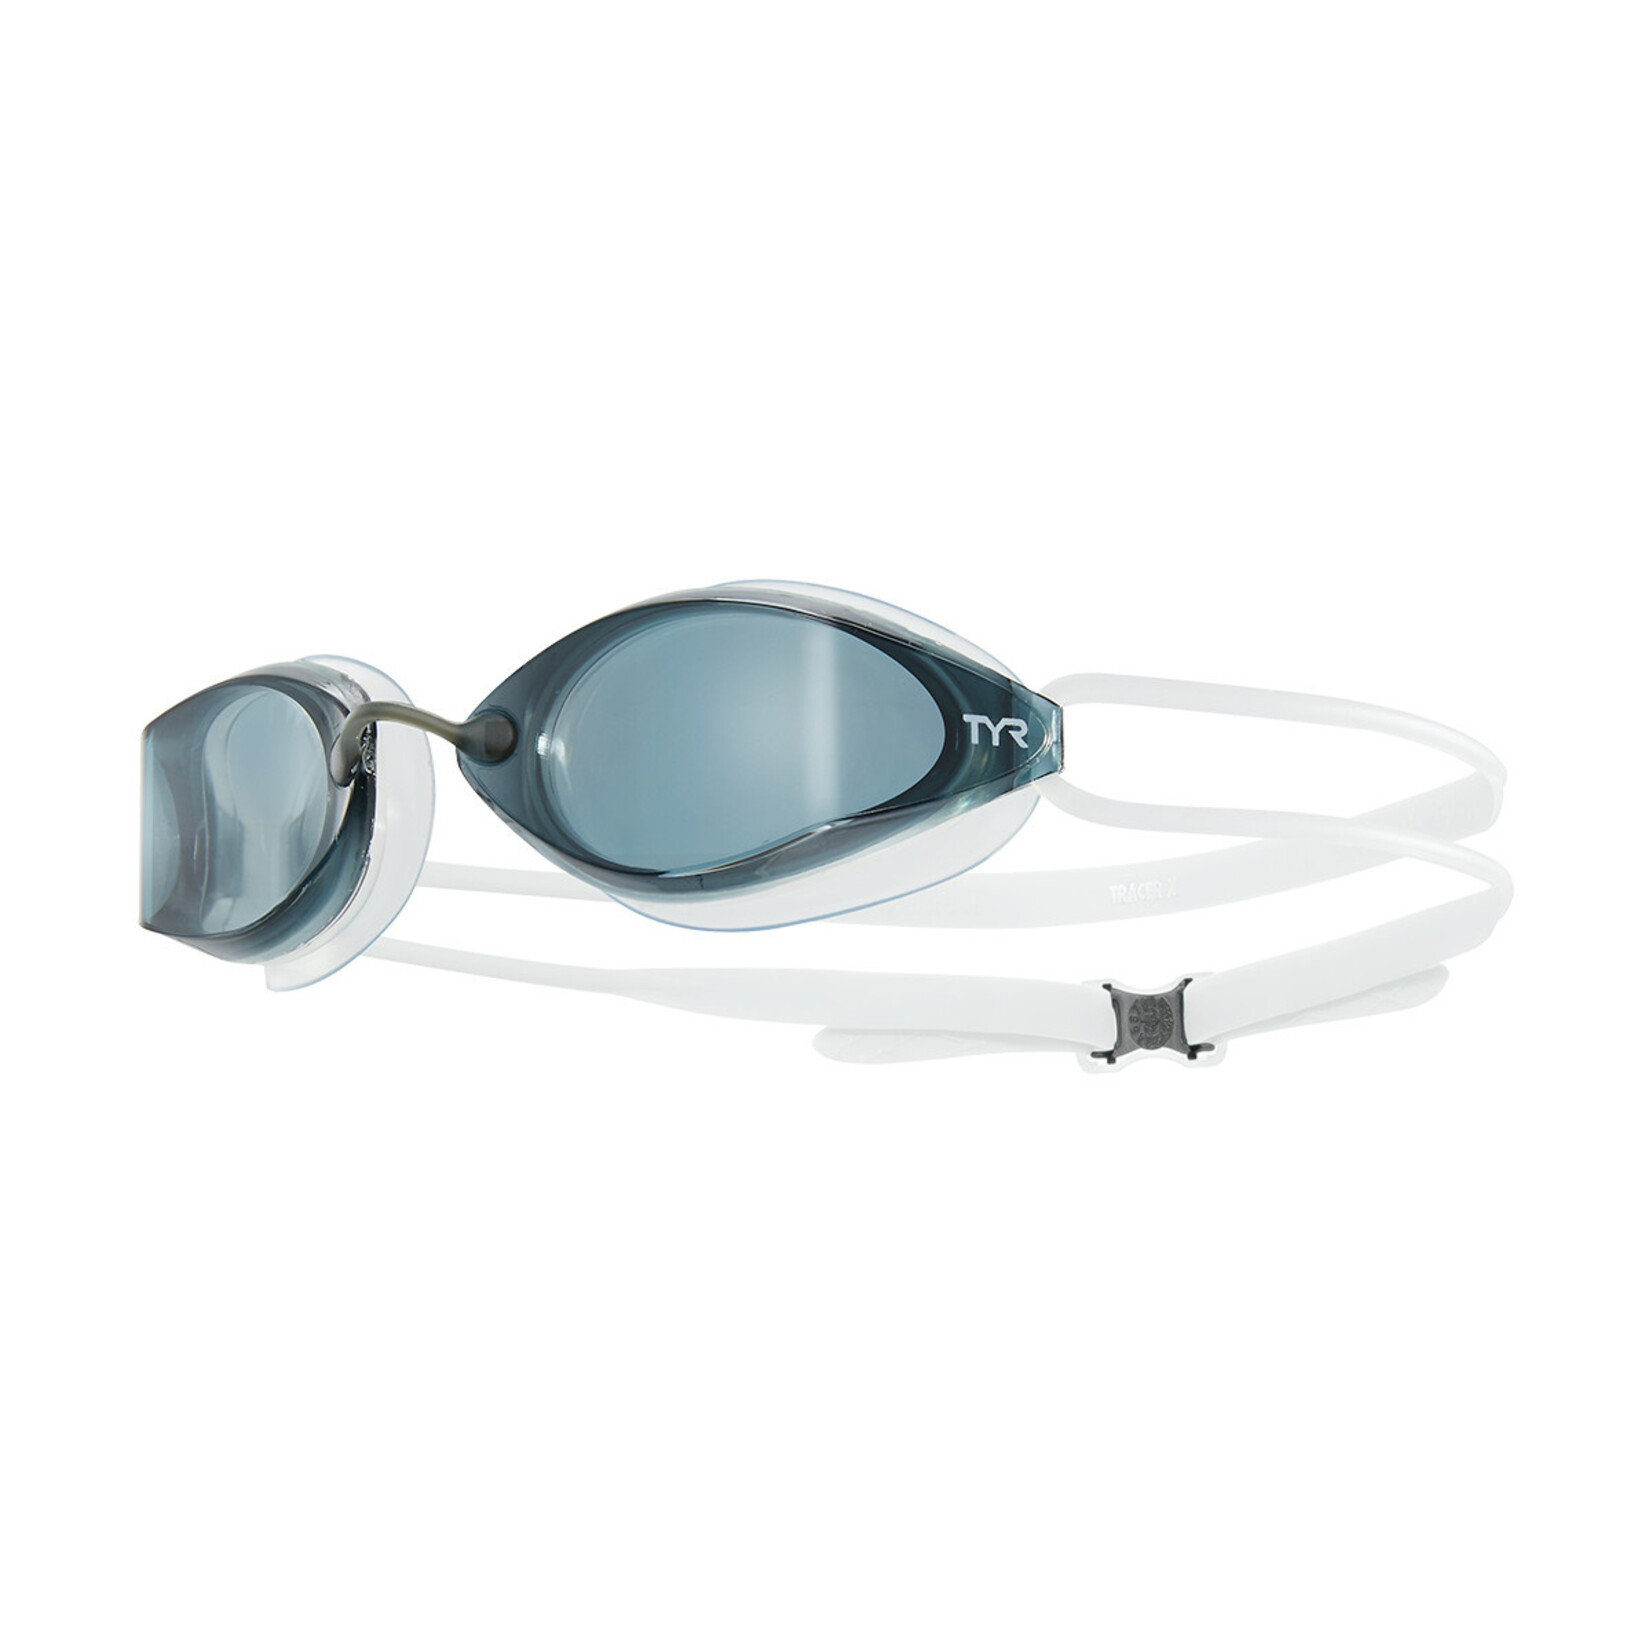 TYR TYR ADULT TRACER-X RACING GOGGLES